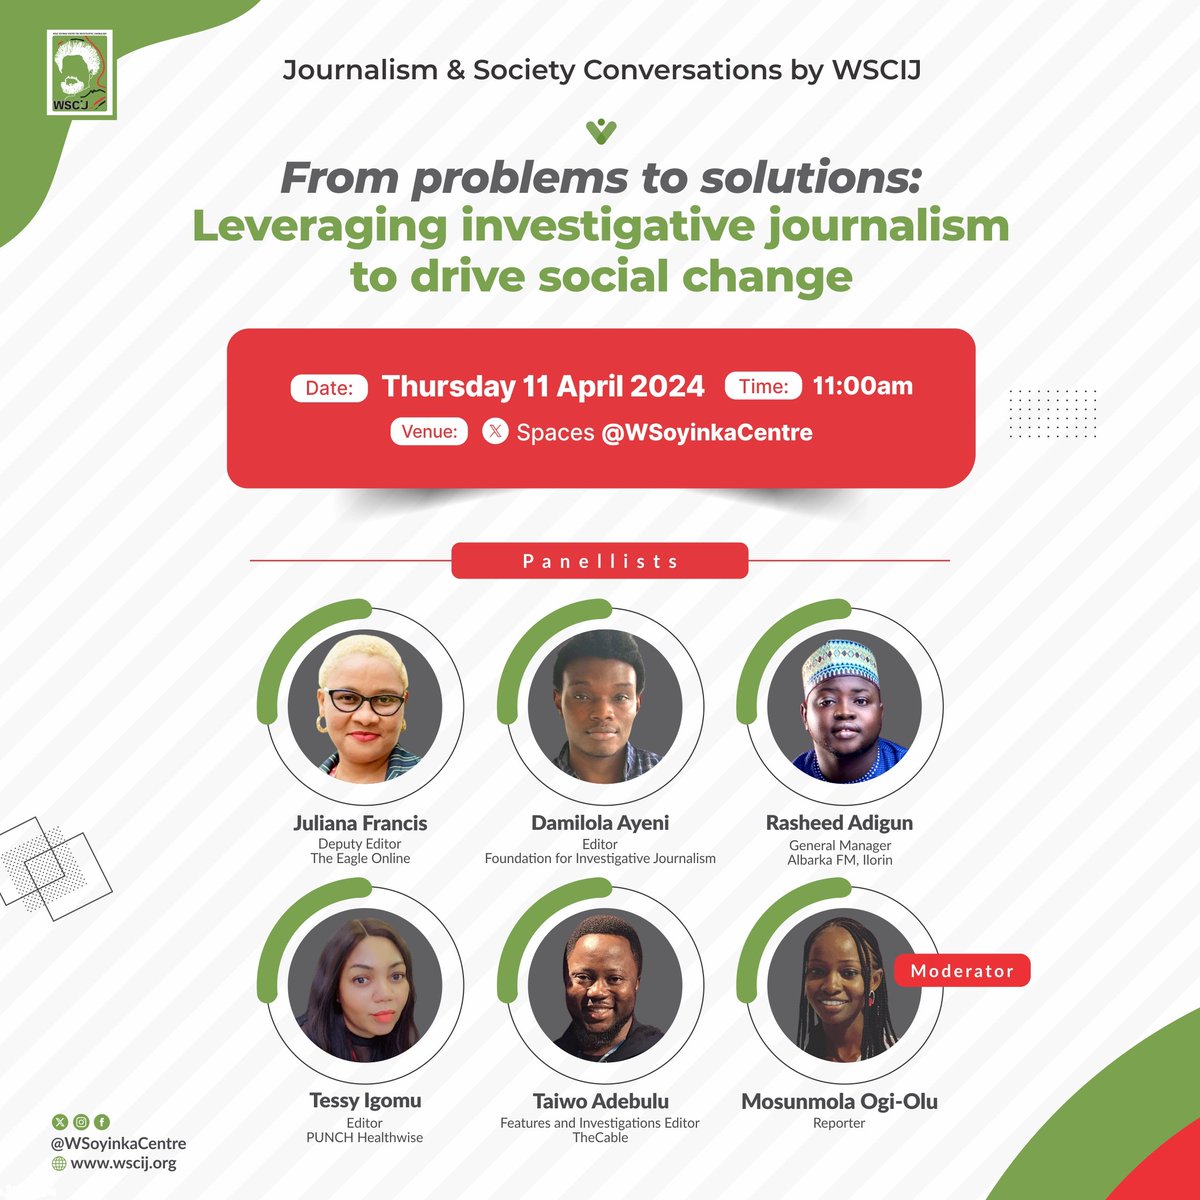 New date alert! #WSCIJConversations earlier scheduled for Tuesday, 9 April will now hold on Thursday, 11 April. As earlier announced, panellists will explore potentials of investigative journalism to ignite societal change. Time: 11:00am Click 👉 bit.ly/4aGNrl6 to join